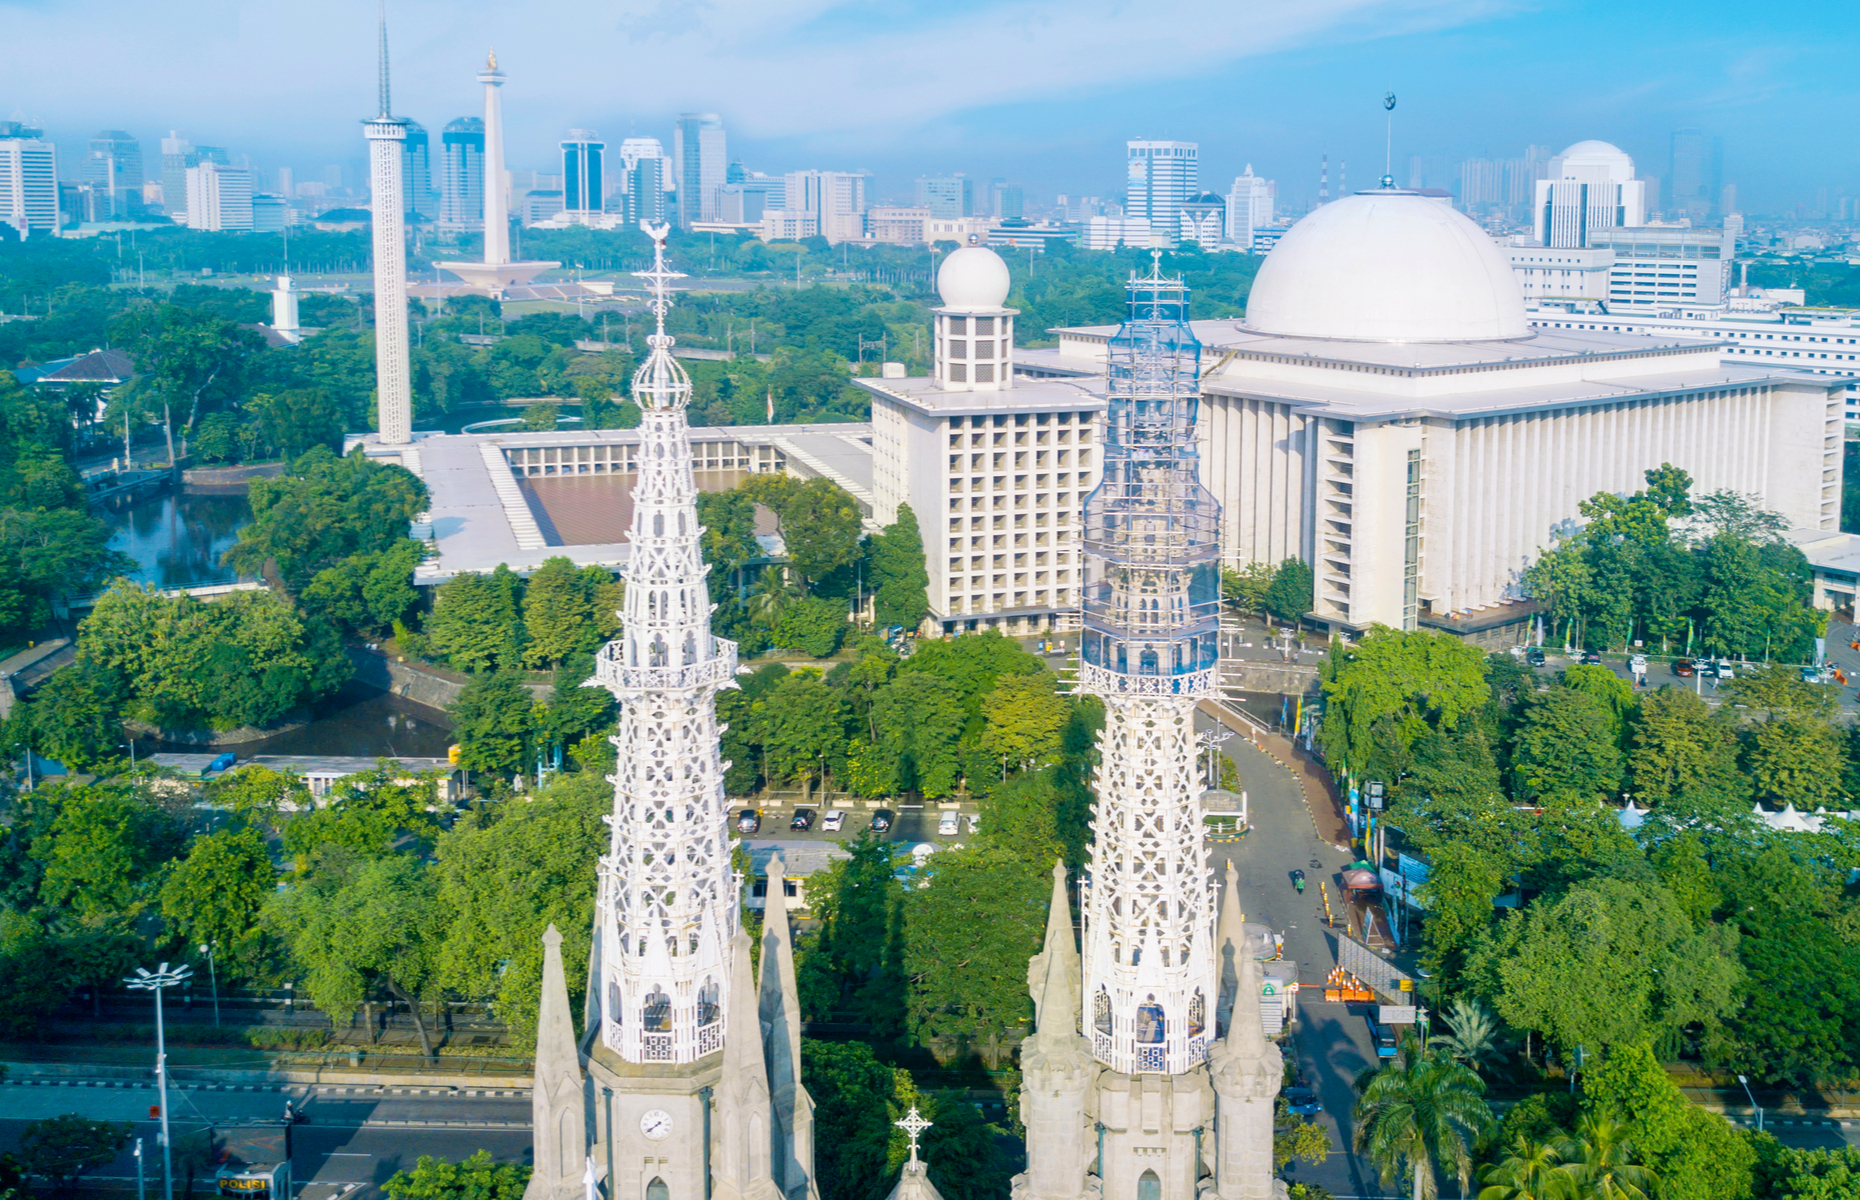 Jakarta Cathedral and Mosque (Image: Creativa Images/Shutterstock)